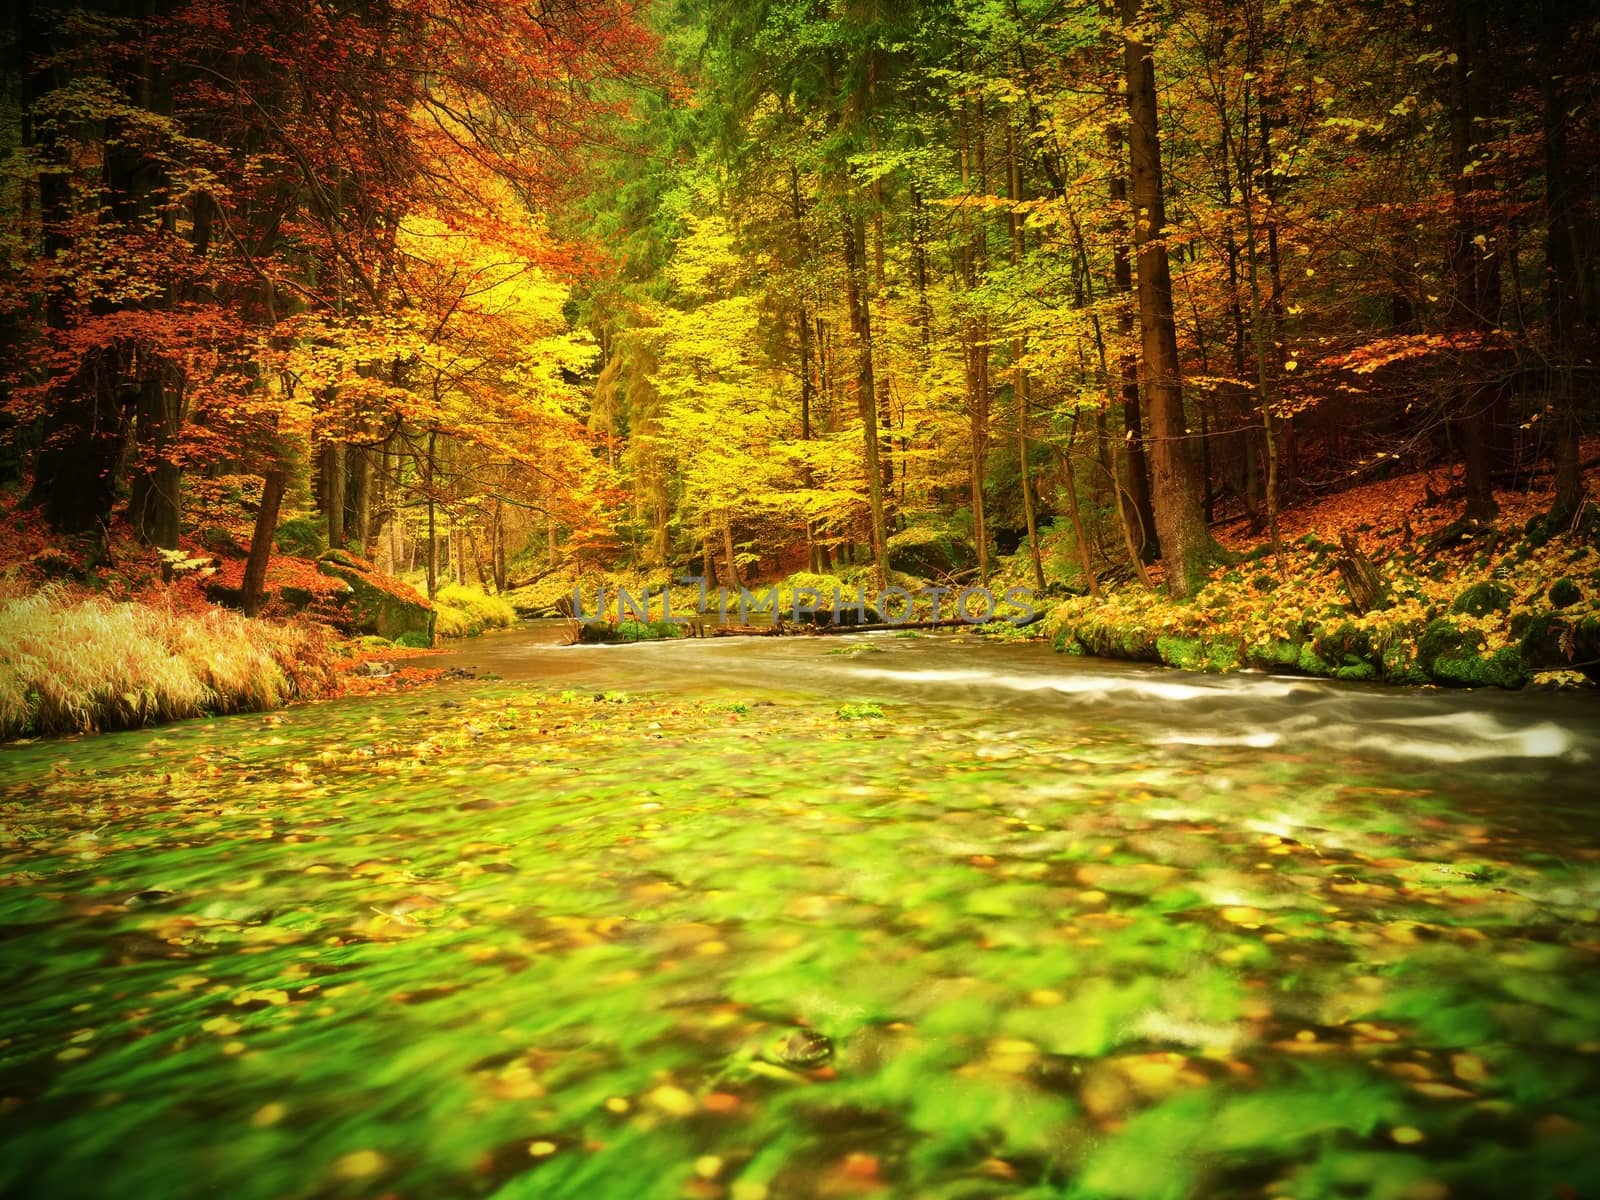 Autumn nature. Mountain river in colorful leaves forest . Mossy and boulders on river bank, green algae